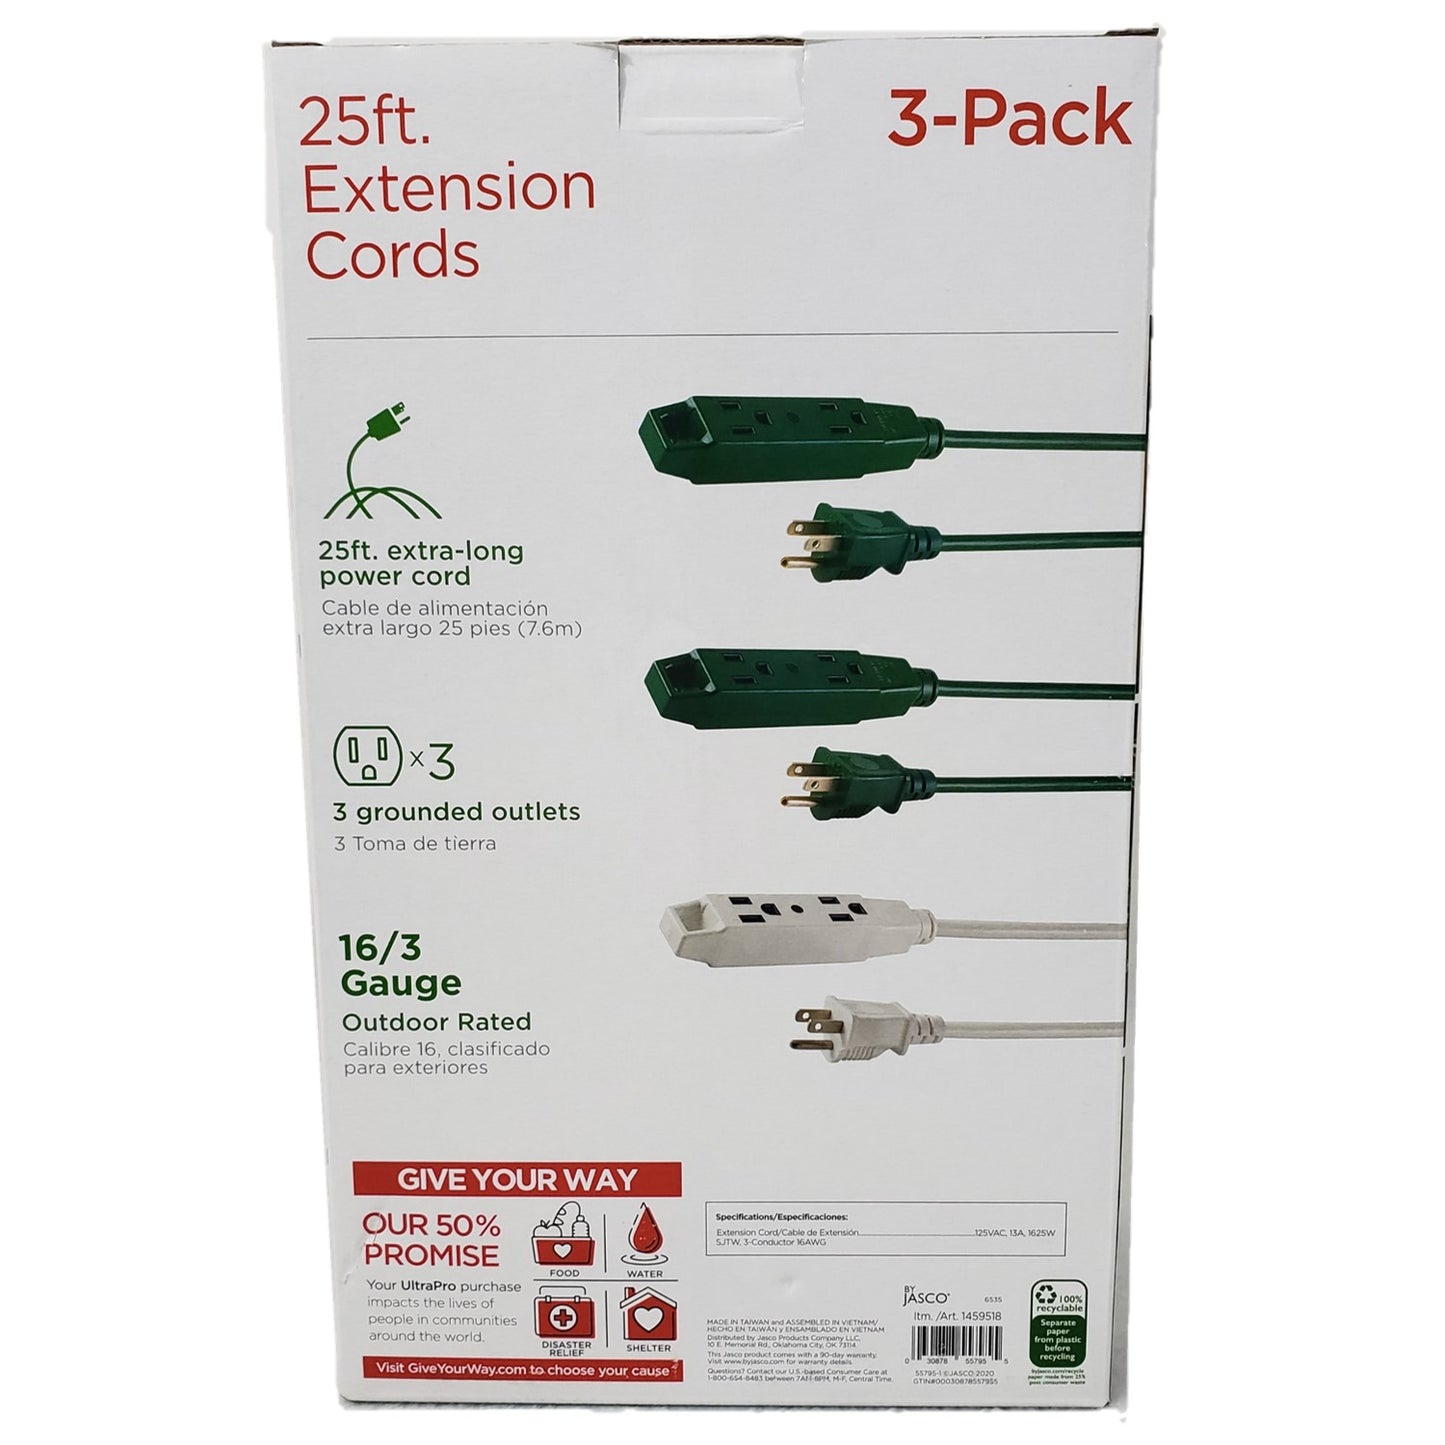 Jasco UltraPro Extension Cords 2 x Green 1 x White 25 Ft each - 3 Pack